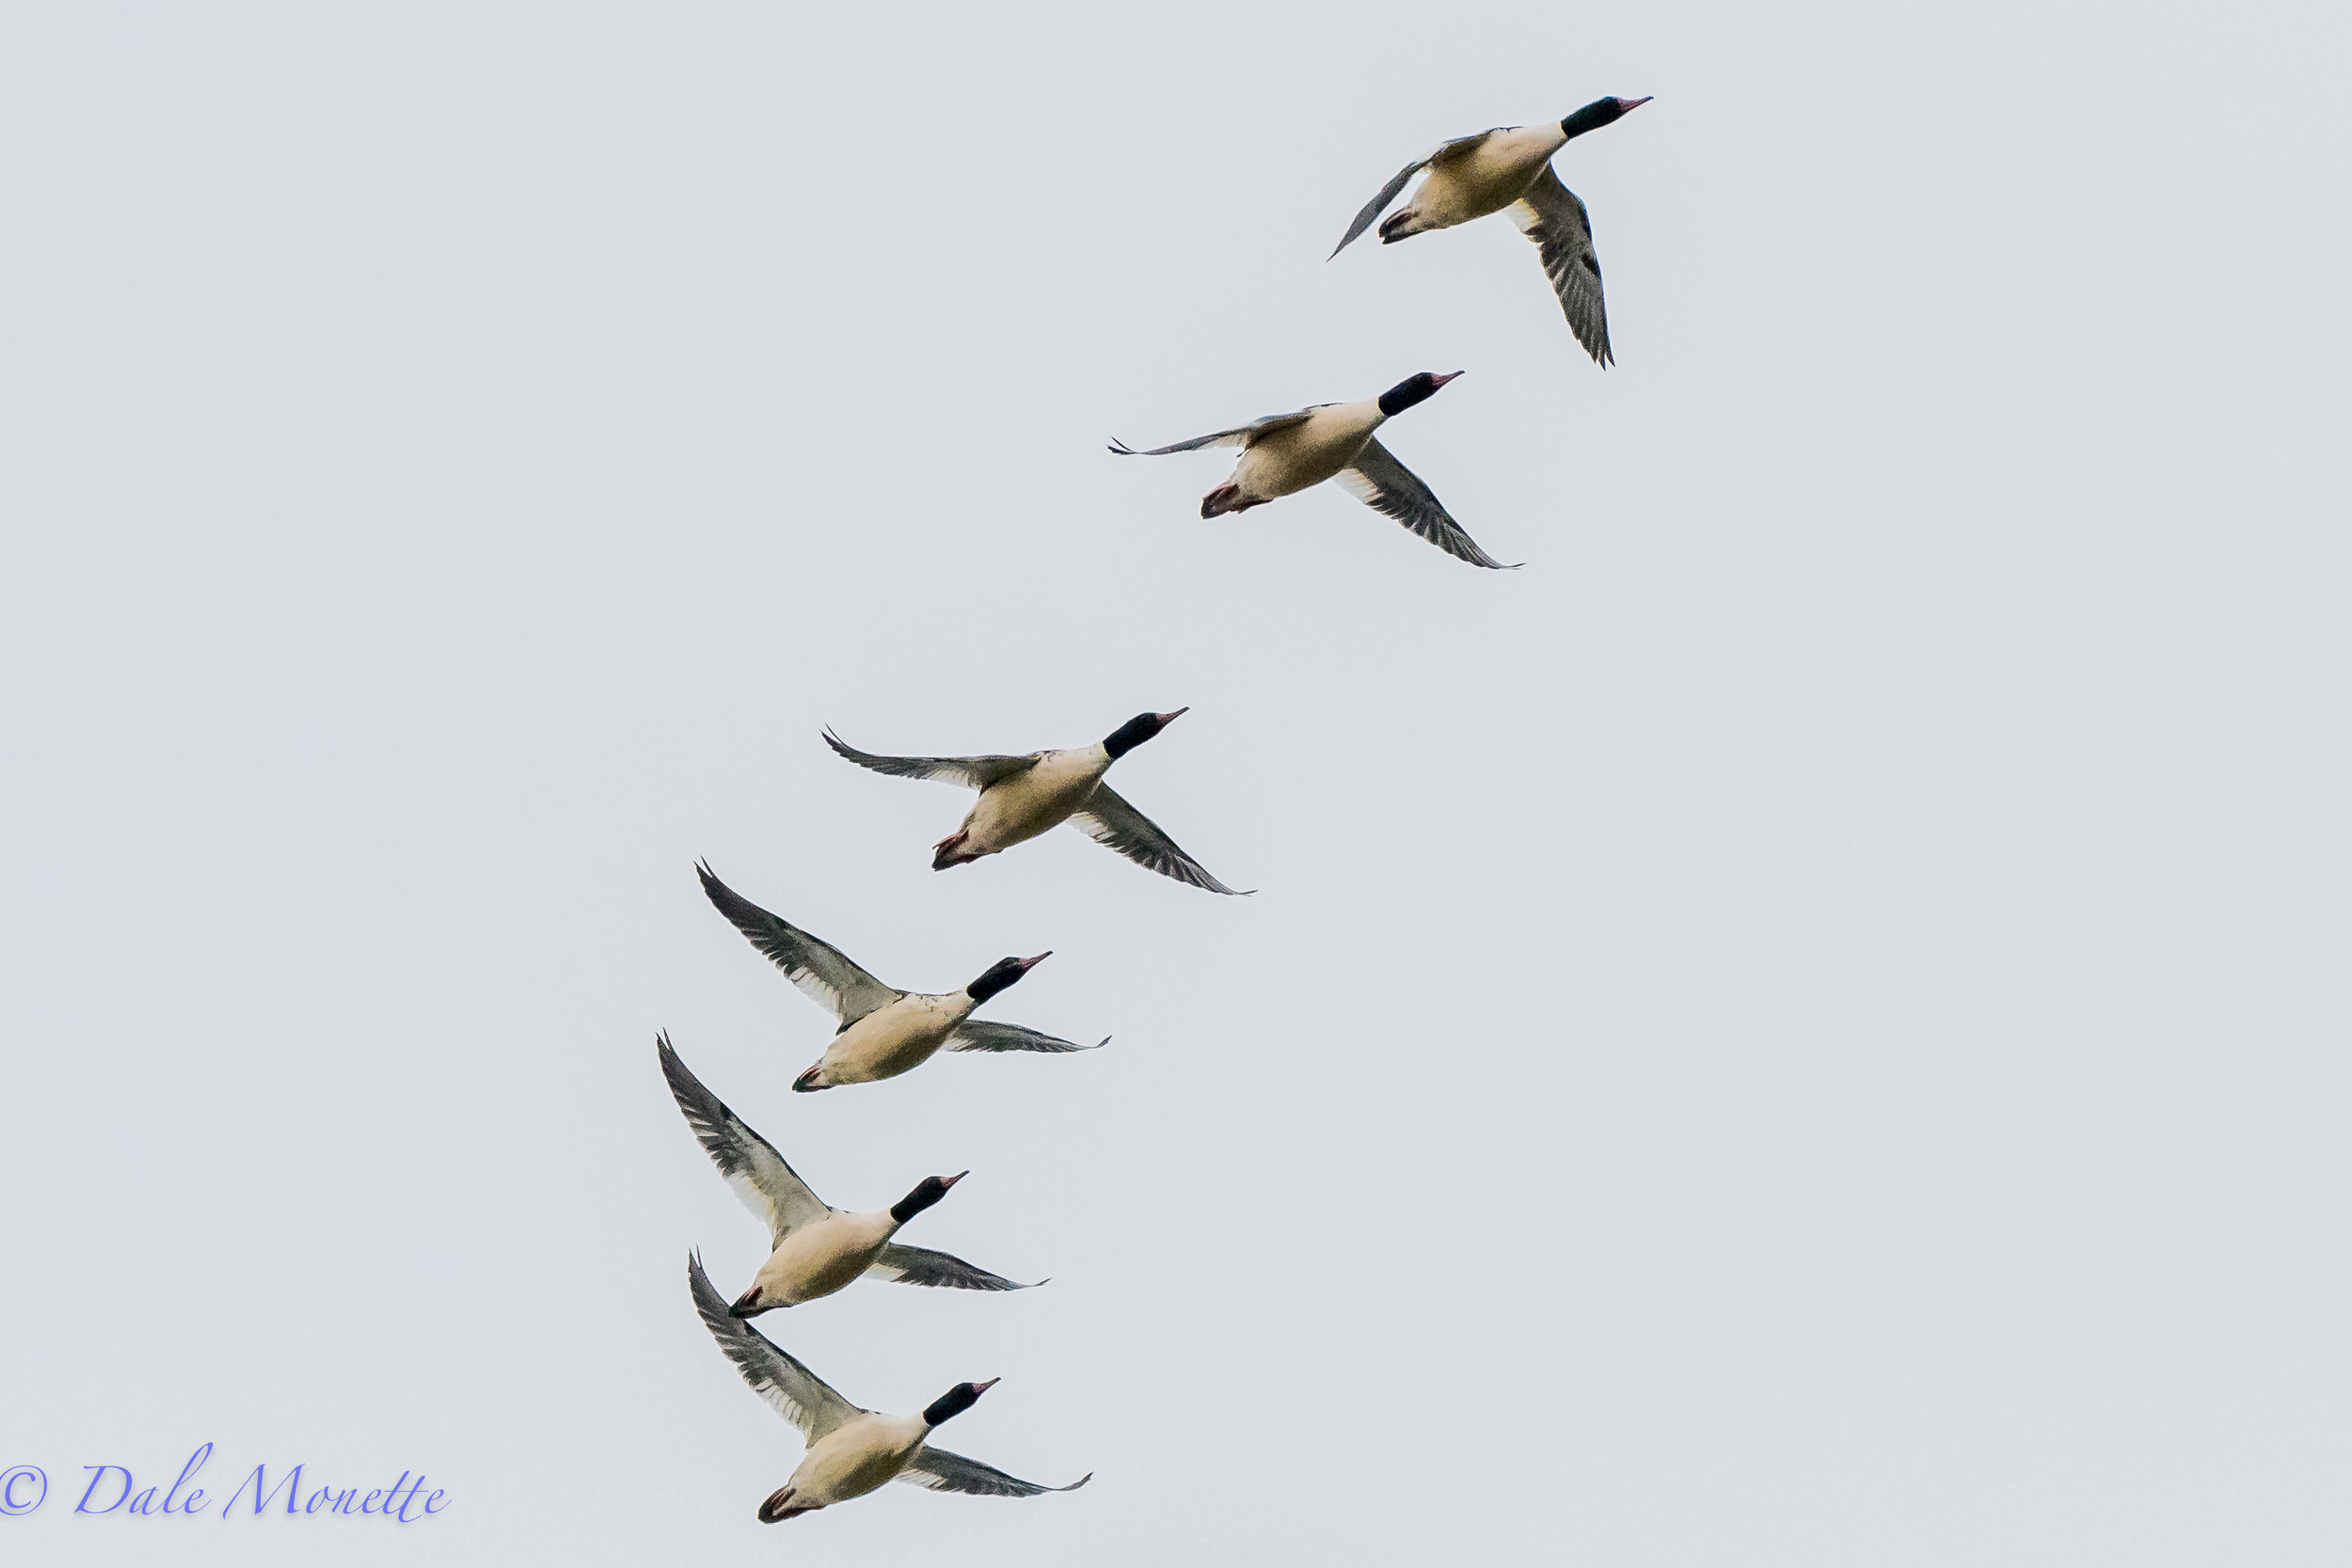   The common merganser numbers are building at Quabbin. In past years I've counted huge 500 plus numbers on the annual Christmas Count... these guys went zipping right over me yesterday morning.......  